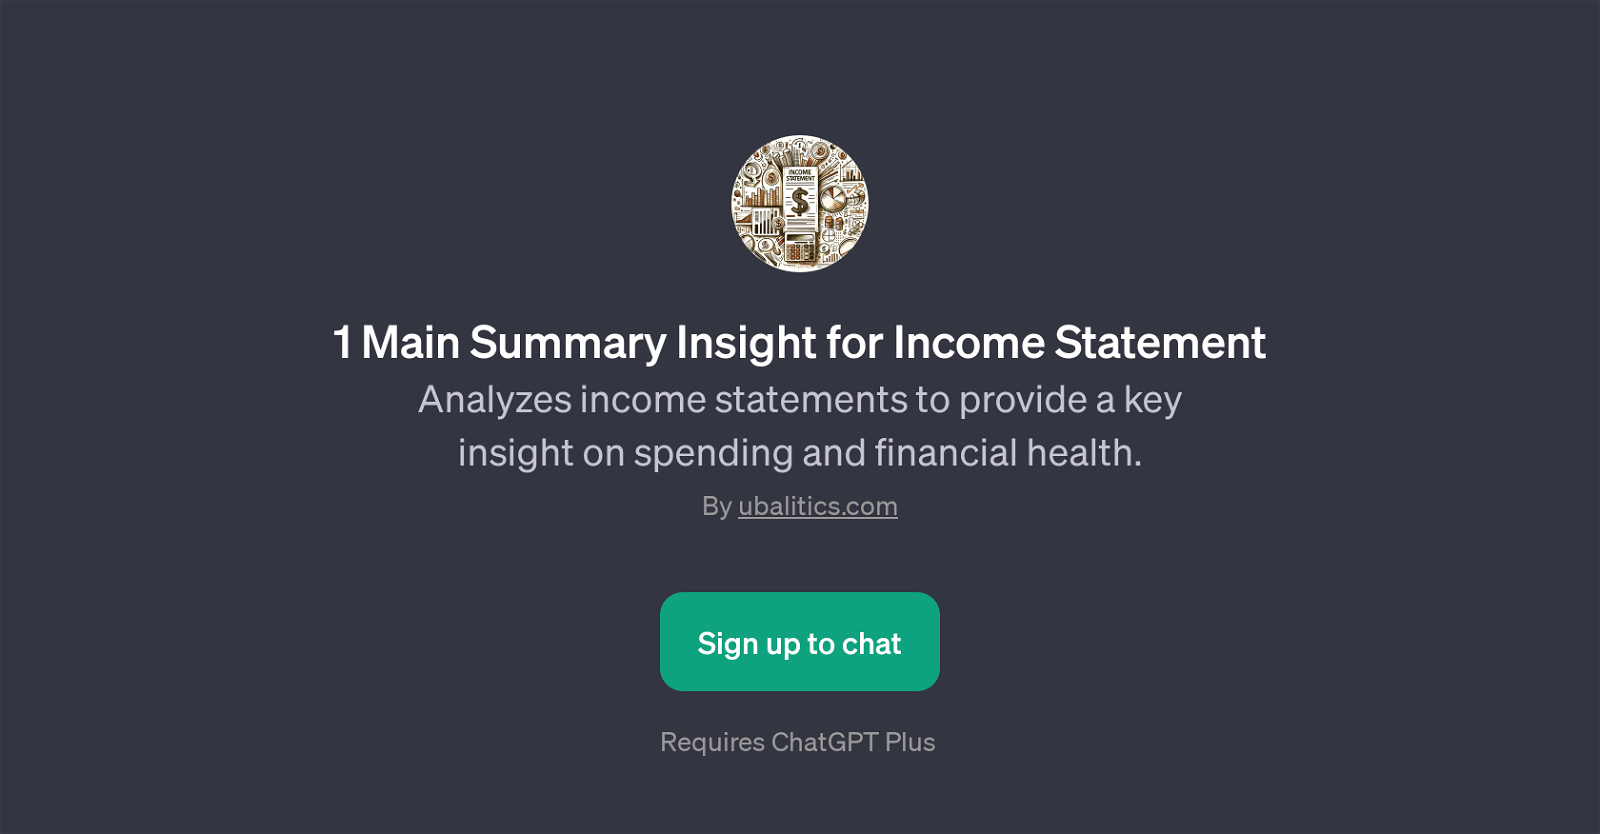 1 Main Summary Insight for Income Statement website